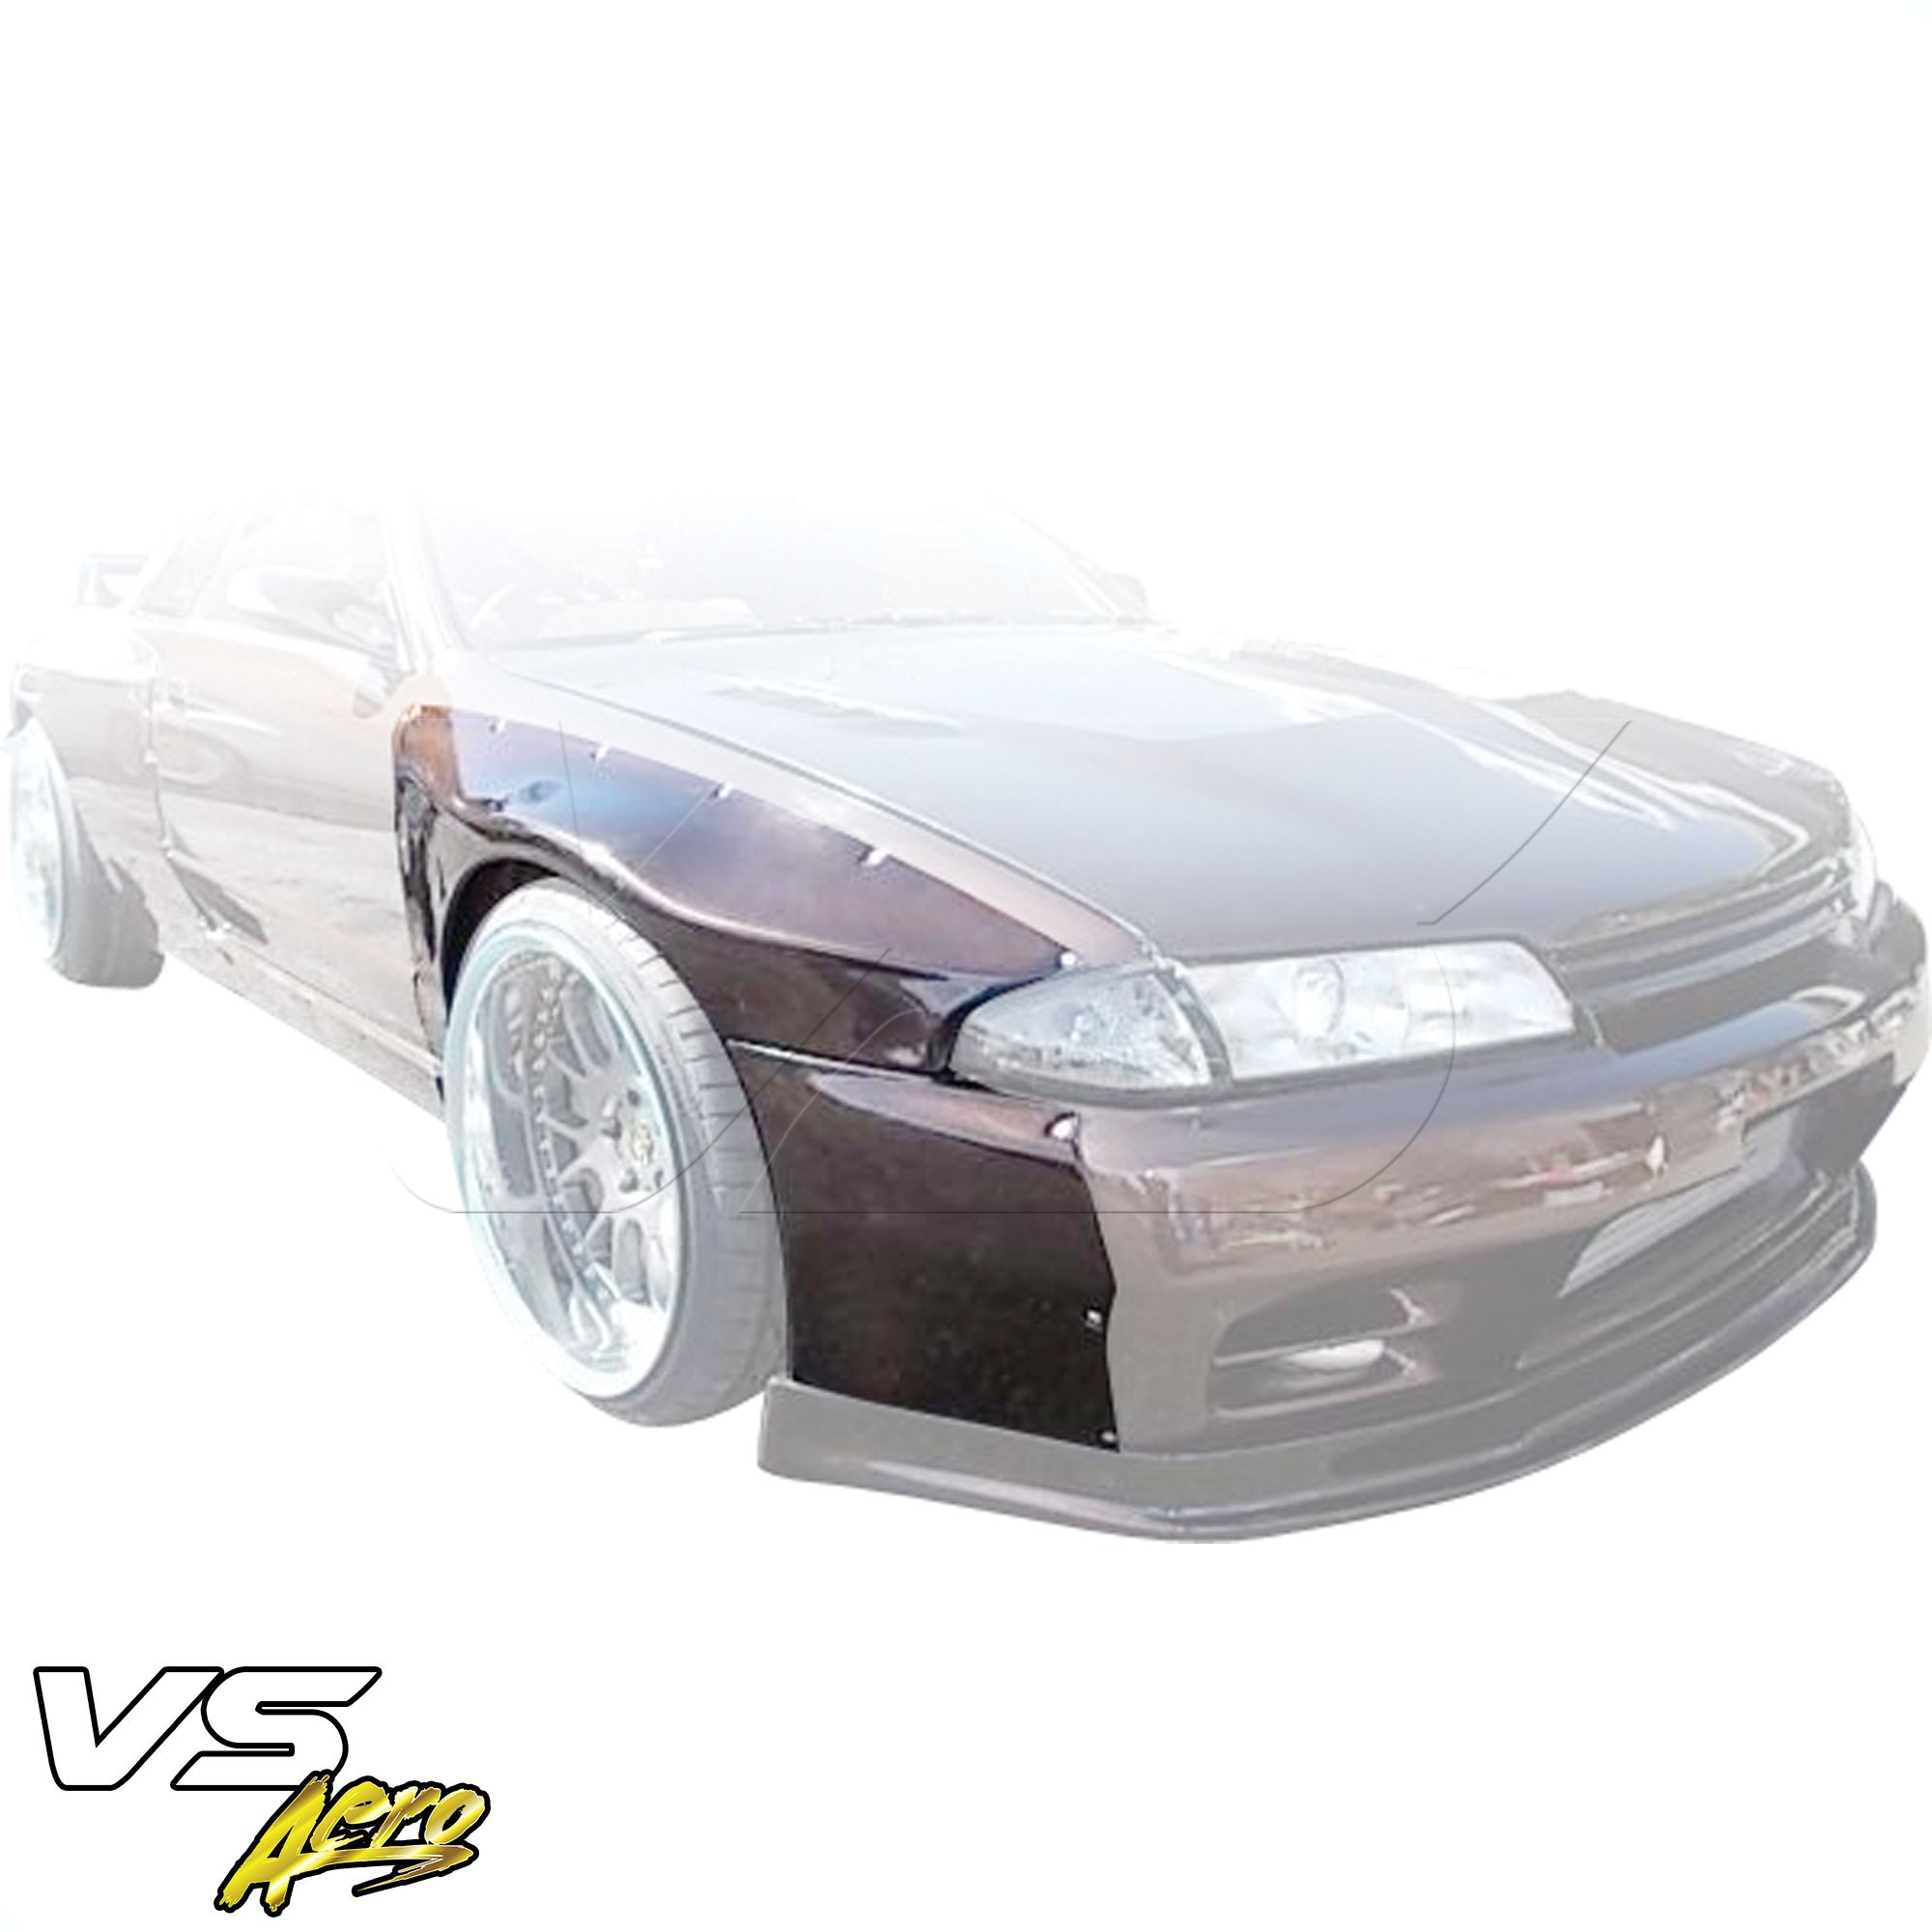 VSaero FRP TKYO Wide Body 40mm Fender Flares (front) 4pc > Nissan Skyline R32 1990-1994 > 2dr Coupe - Image 9